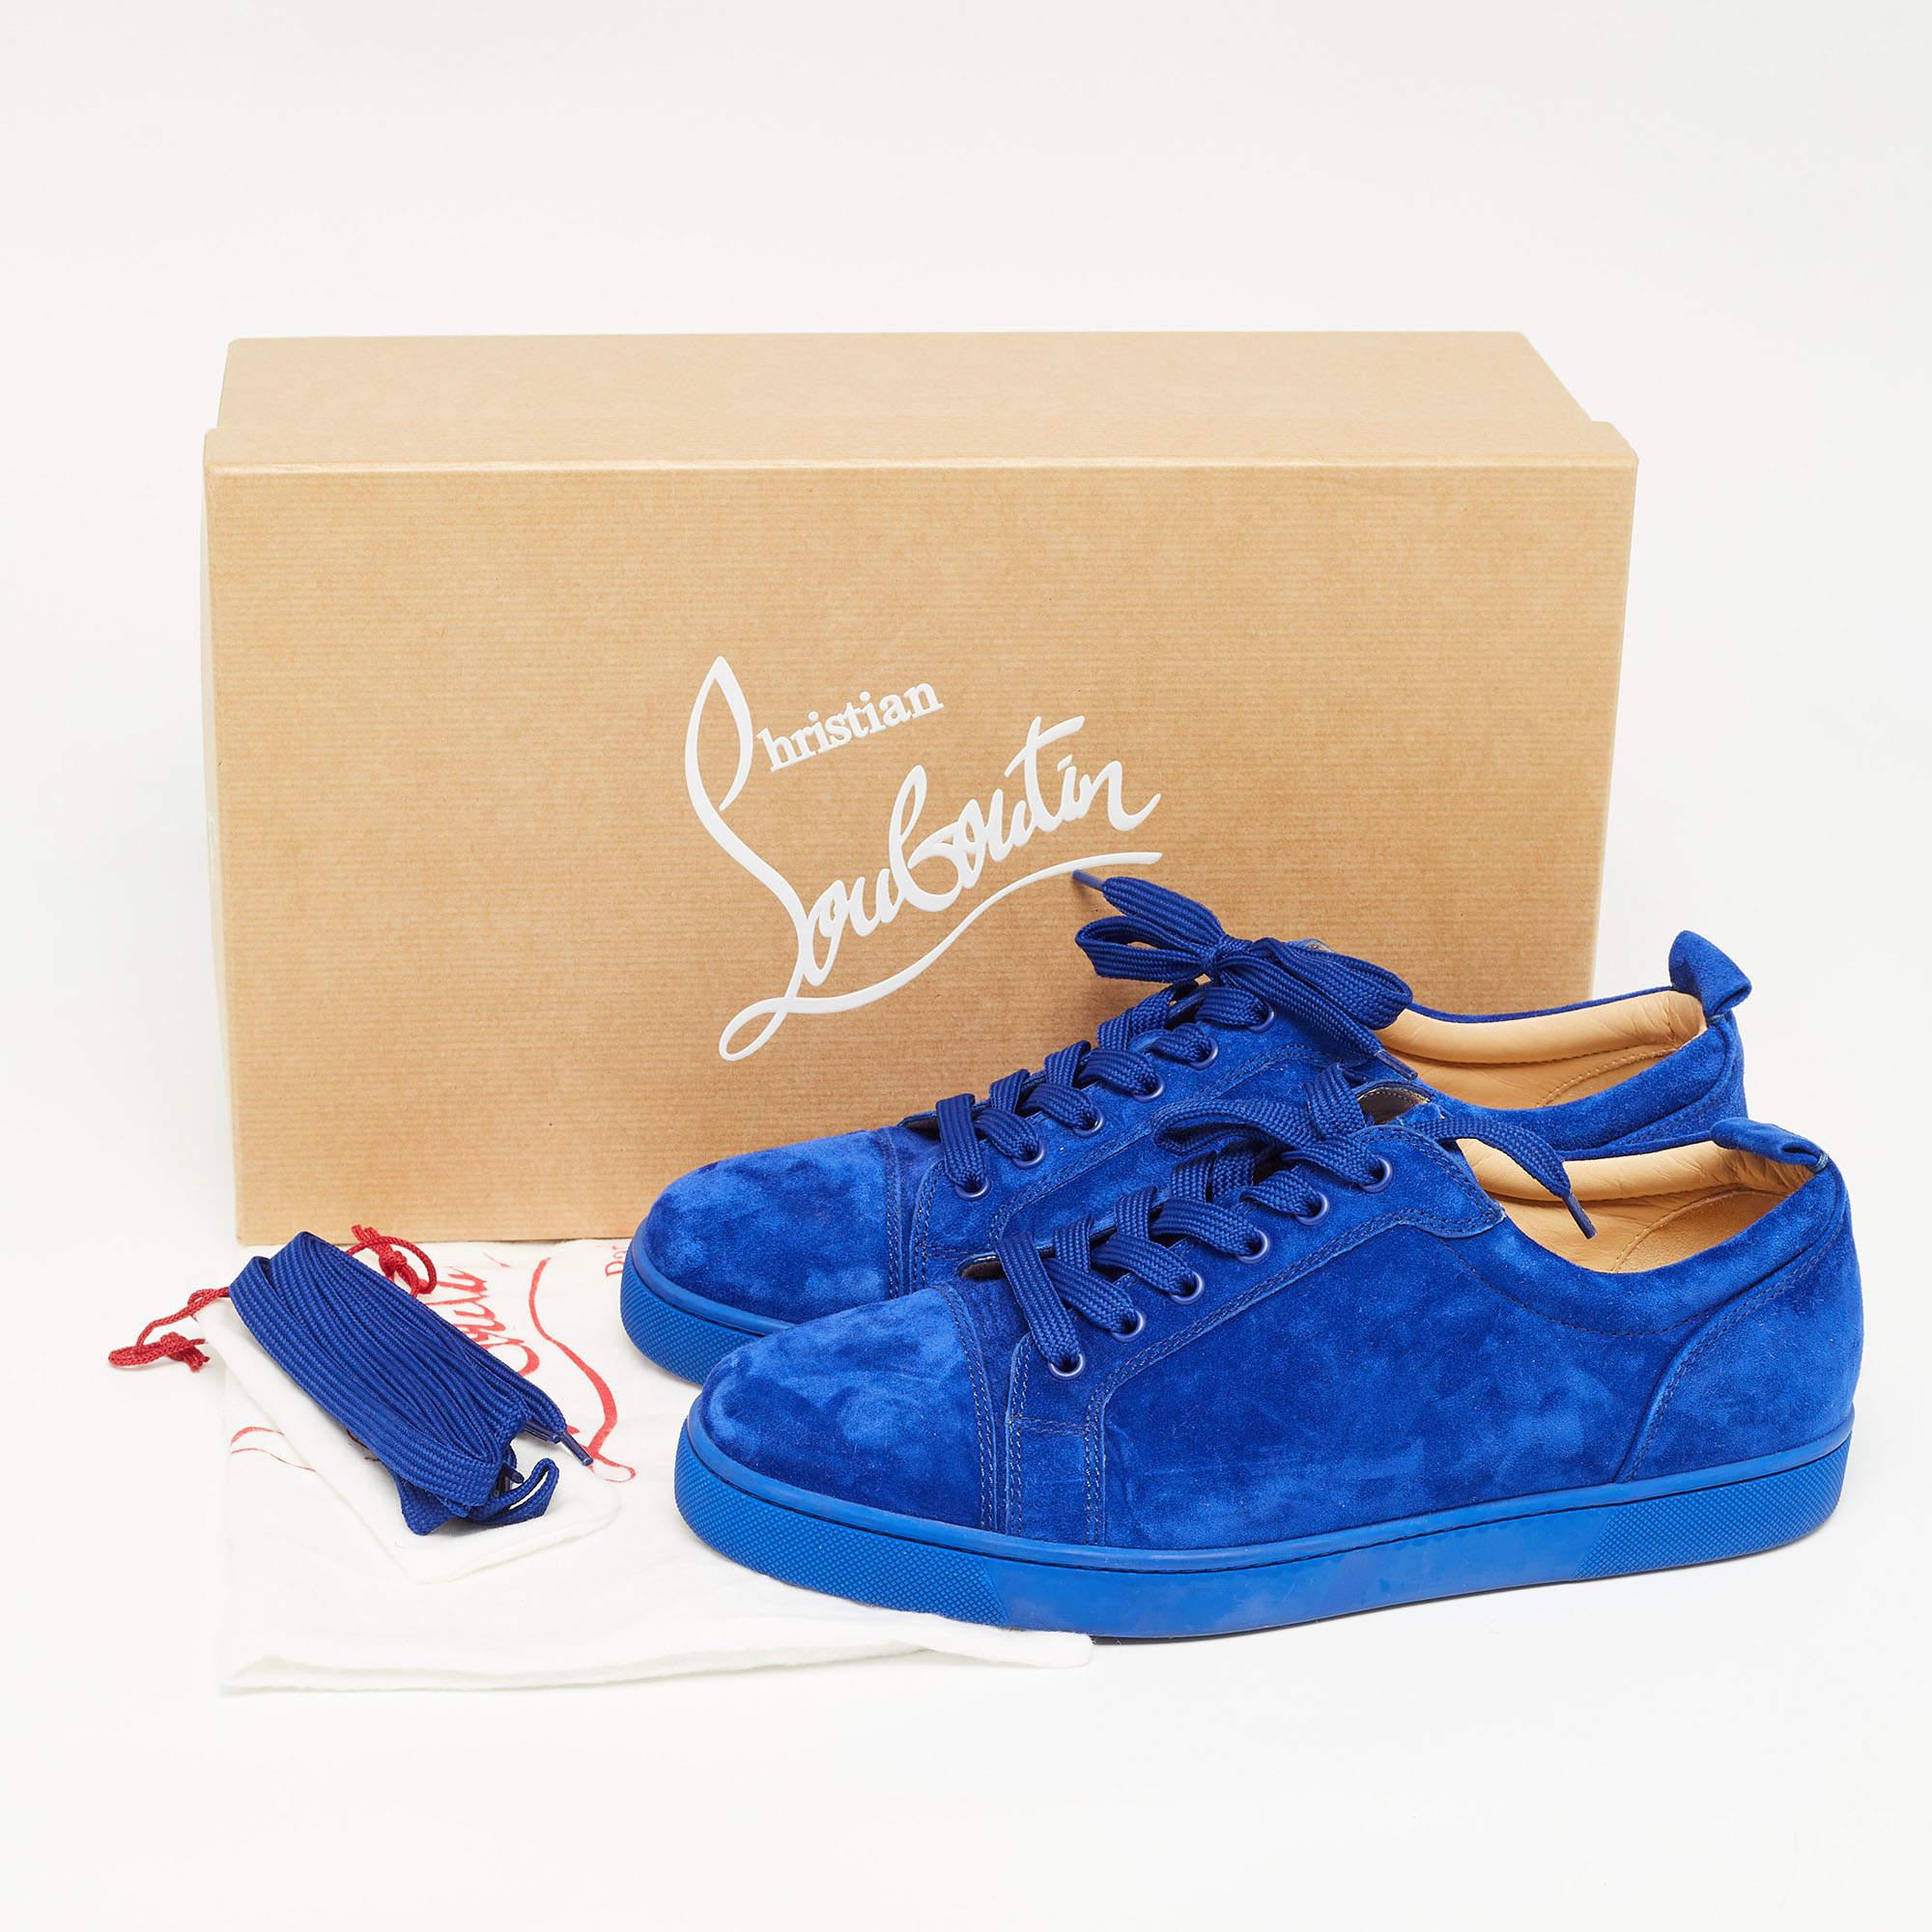 Christian Louboutin Blue Suede Leather Low Top Sneakers Size 42.5 5